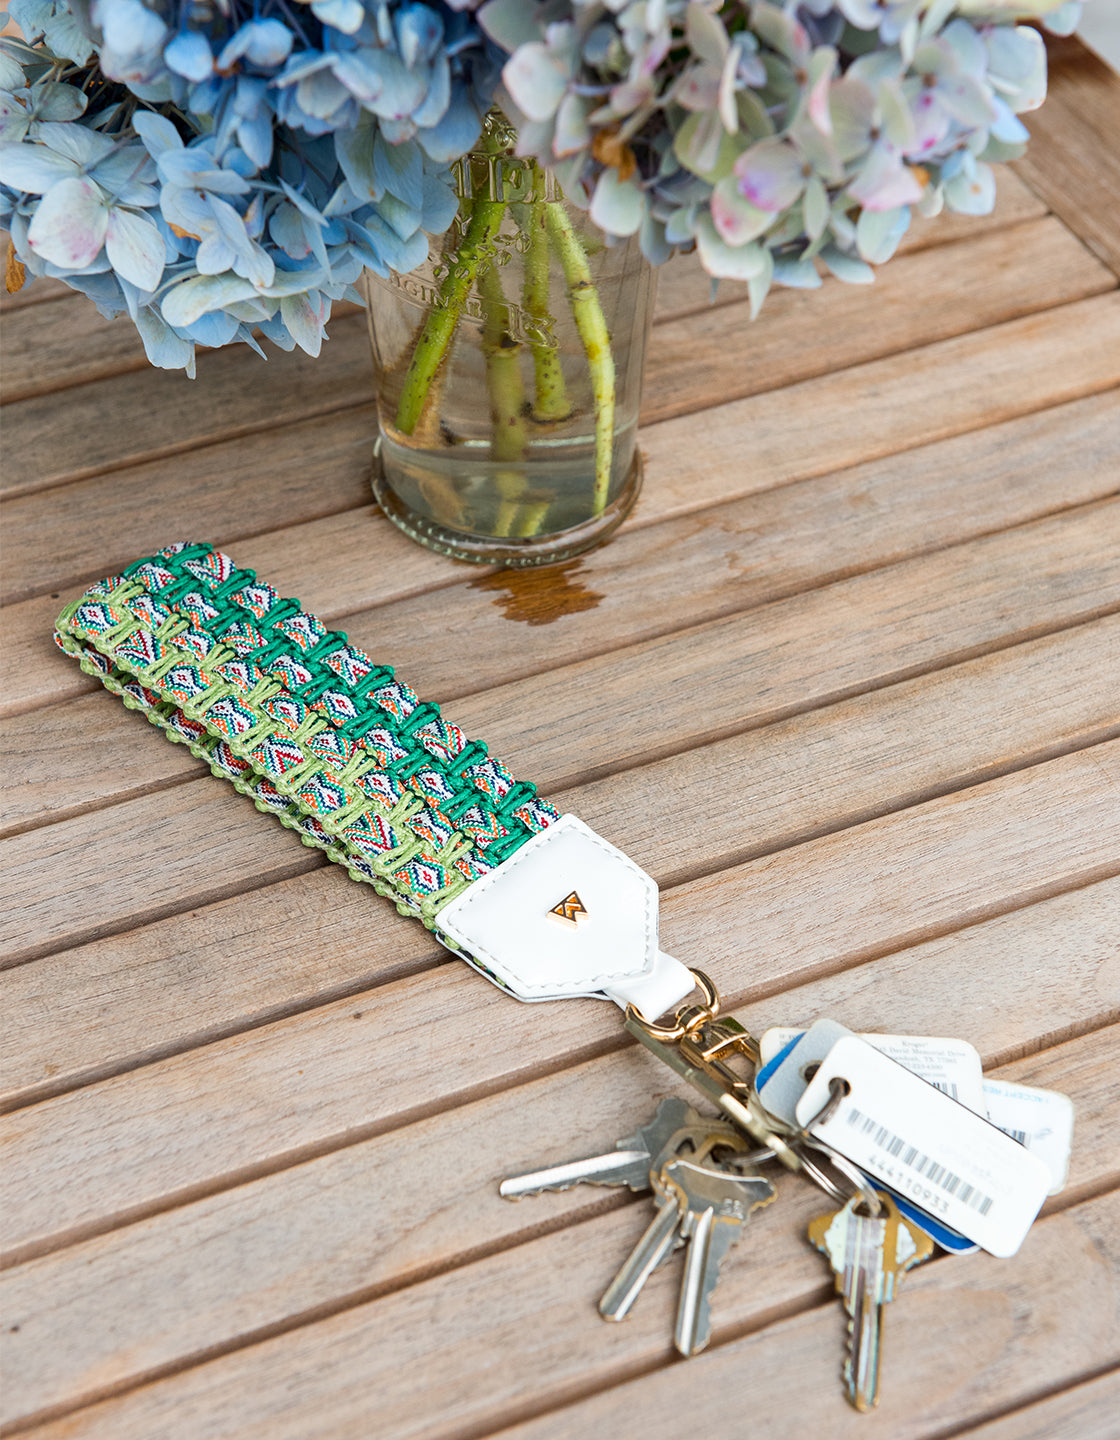 Top View Keep on Cruisin Keychain in White with Keys 